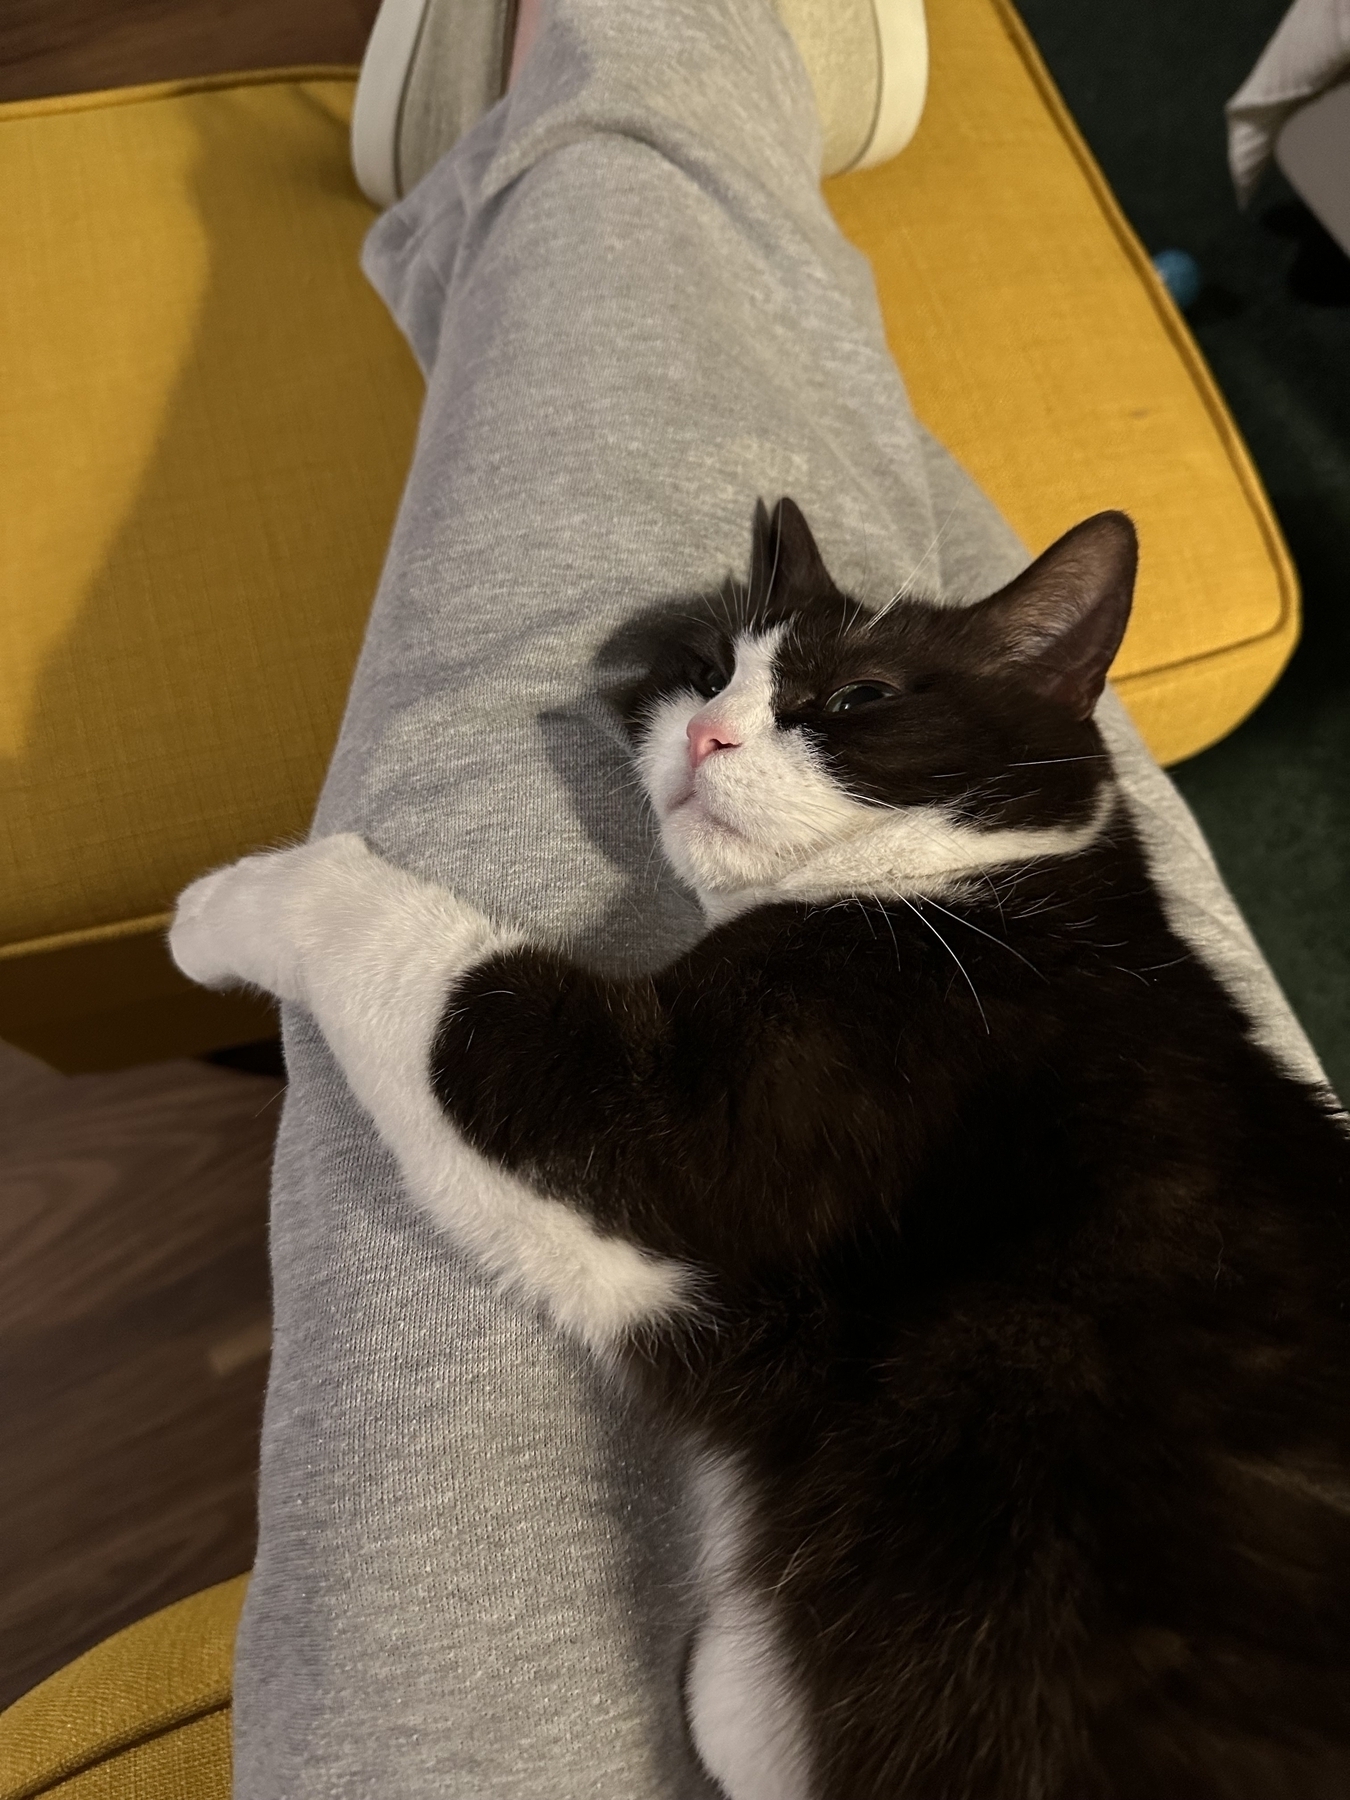 A black and white cat laying on the legs of a person wearing grey track suit pants. The legs are resting on a yellow footstool.